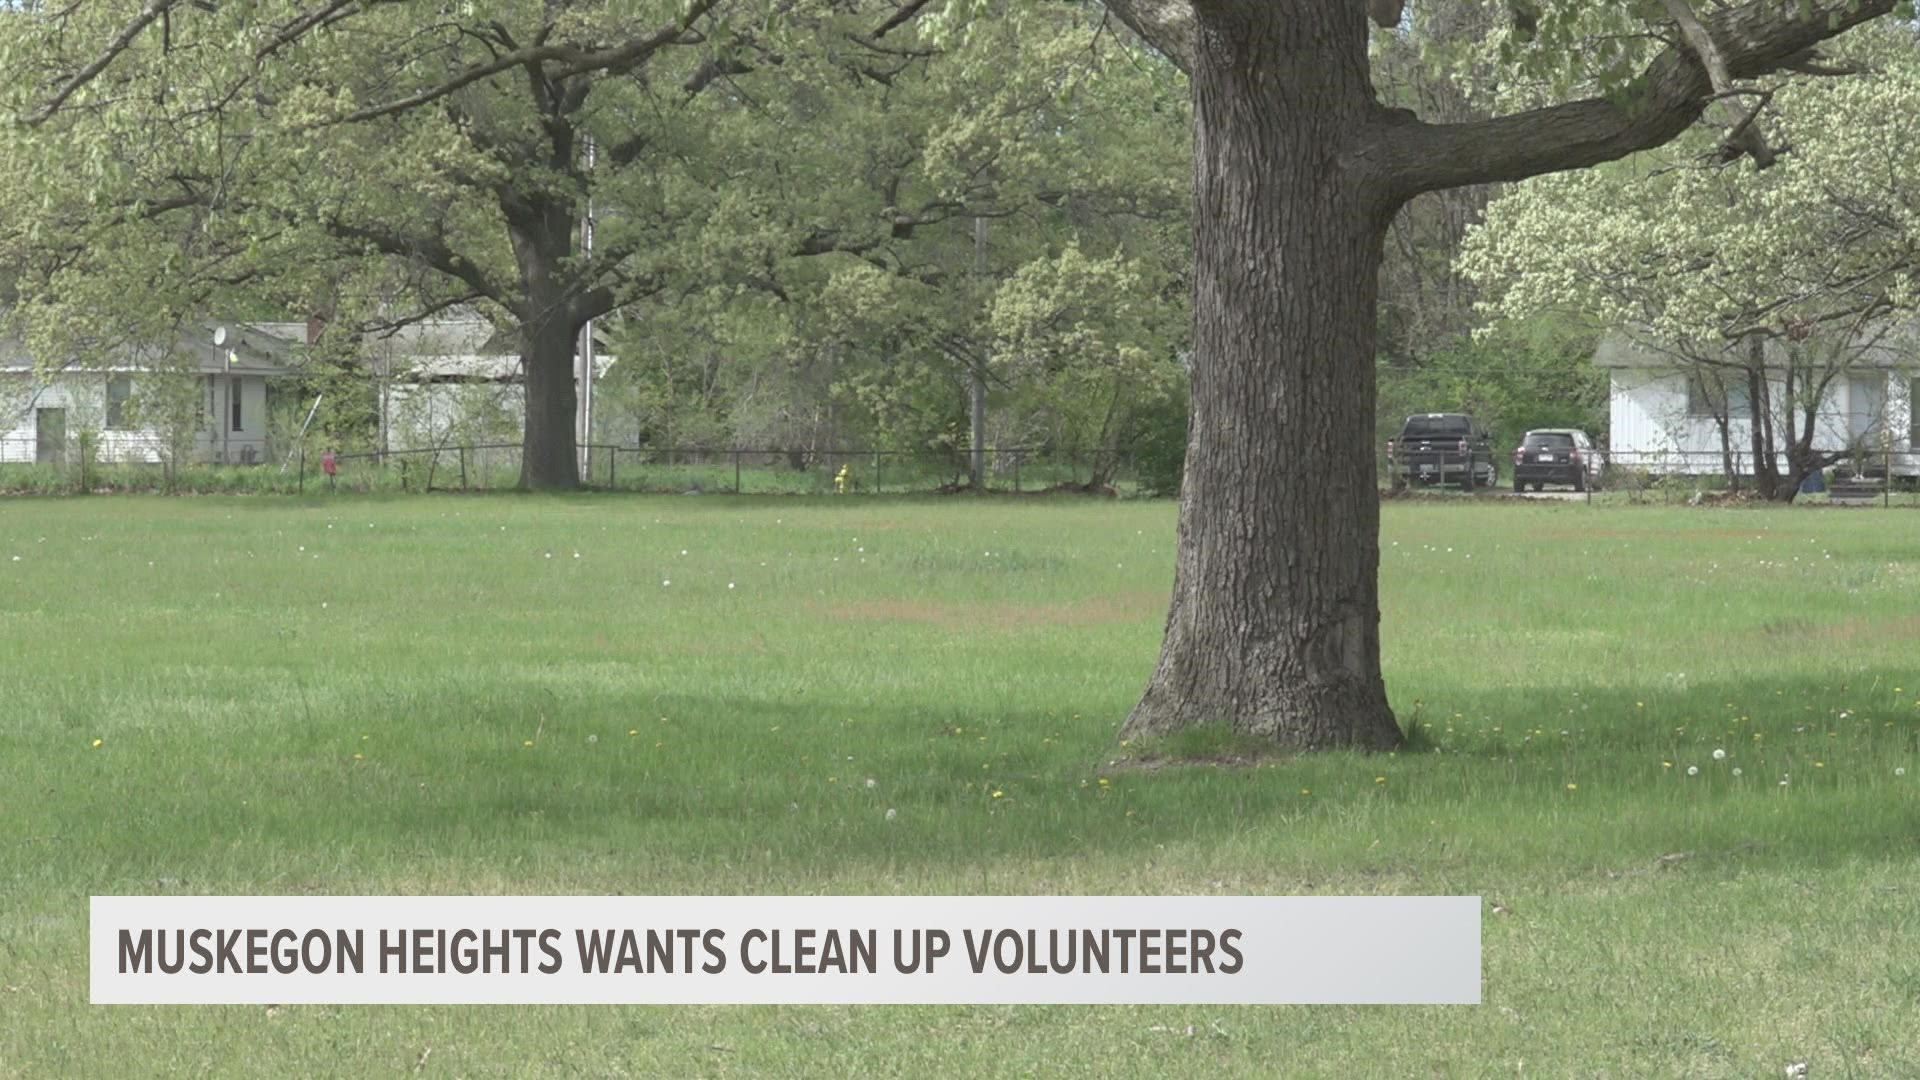 The City of Muskegon Heights will be holding citywide clean-up events on the third Saturday of each month, beginning on May 21.